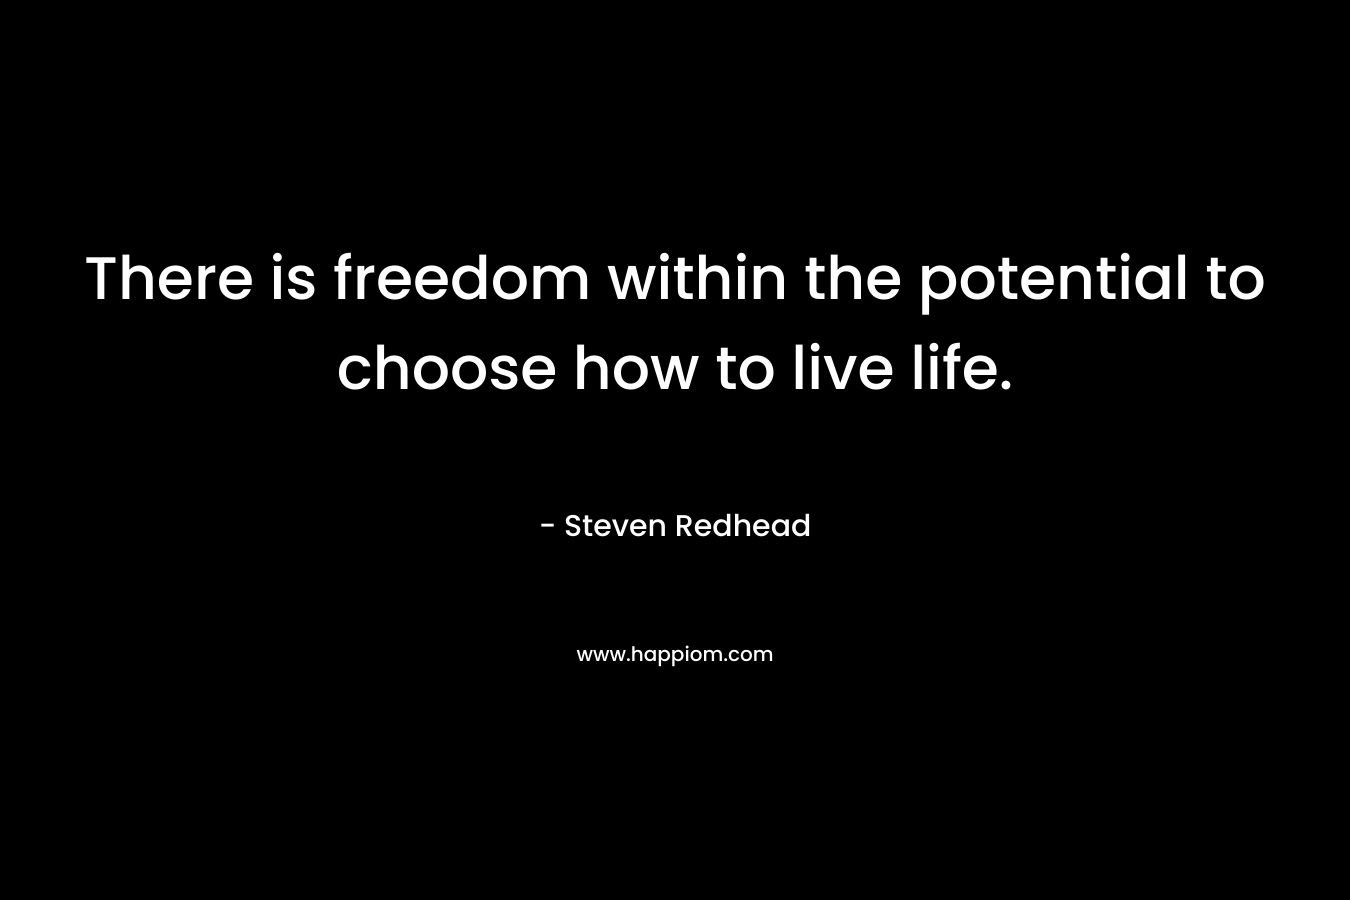 There is freedom within the potential to choose how to live life.